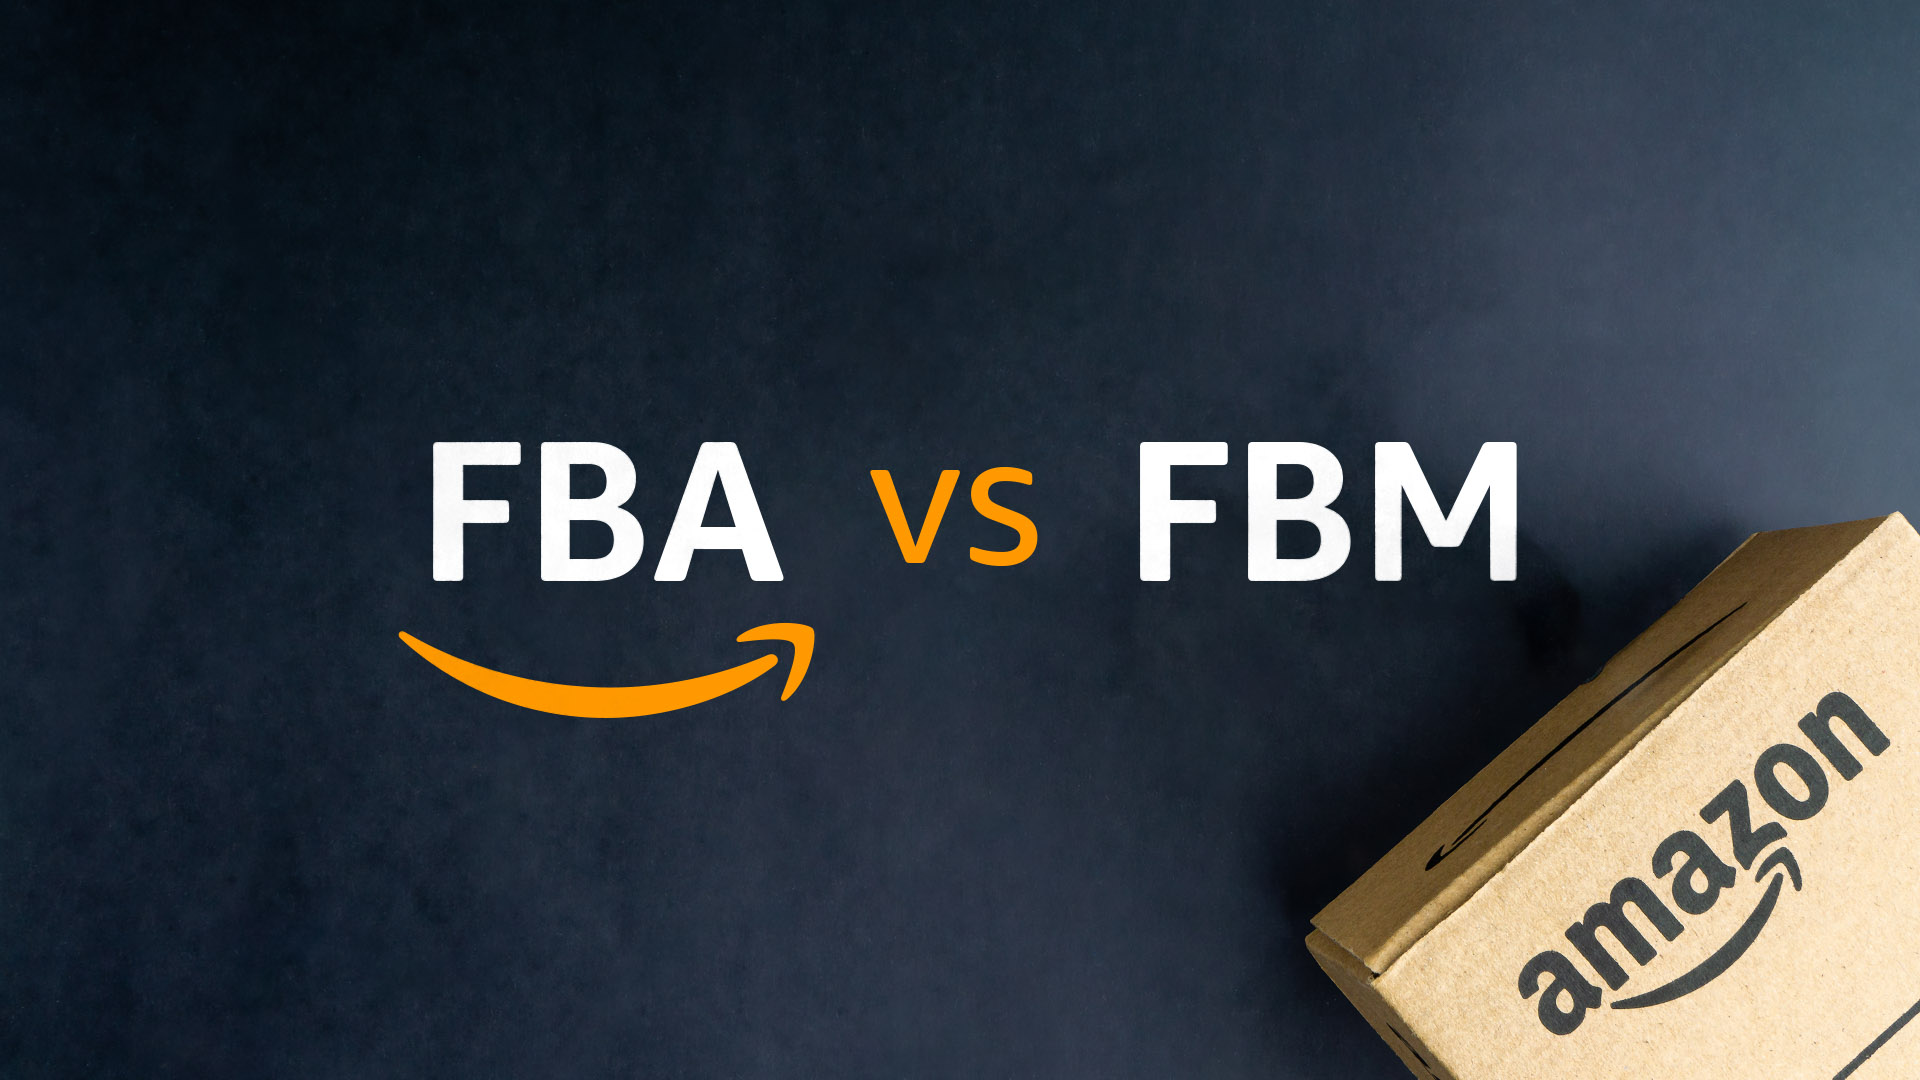 Amazon FBM and Amazon FBA: Which one is right for you?